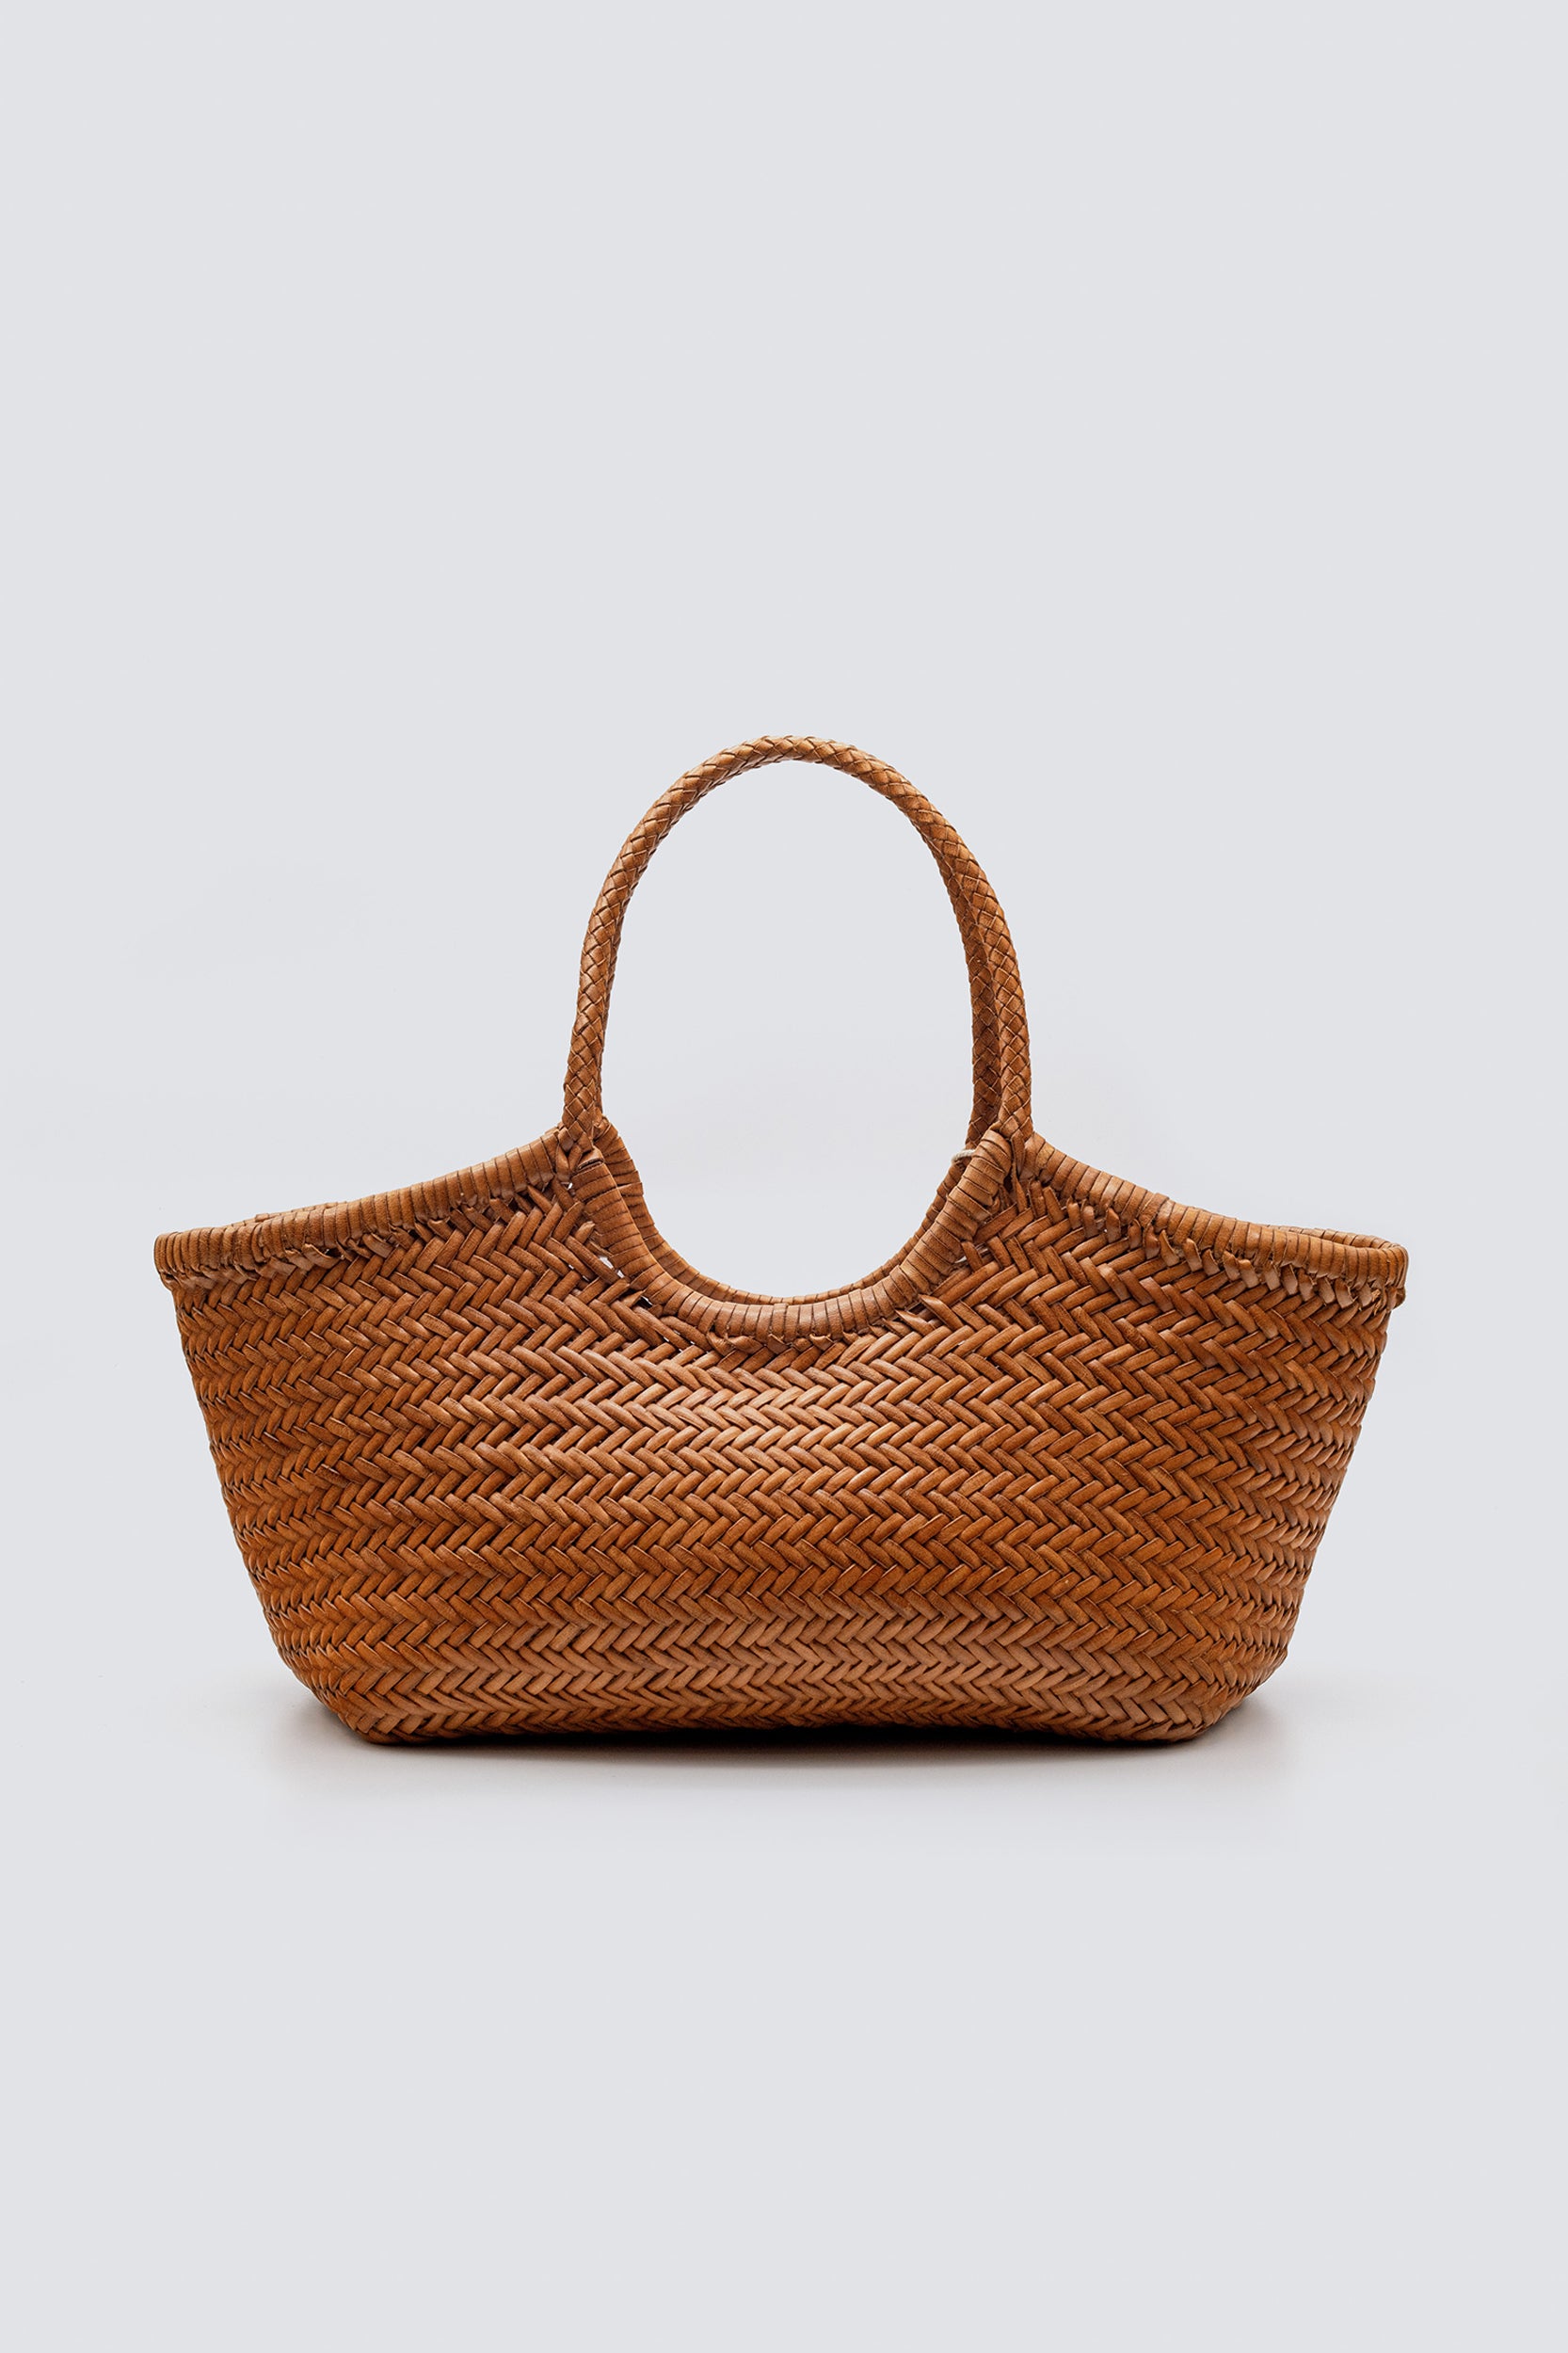 Buy Basket Purse Online In India  Etsy India